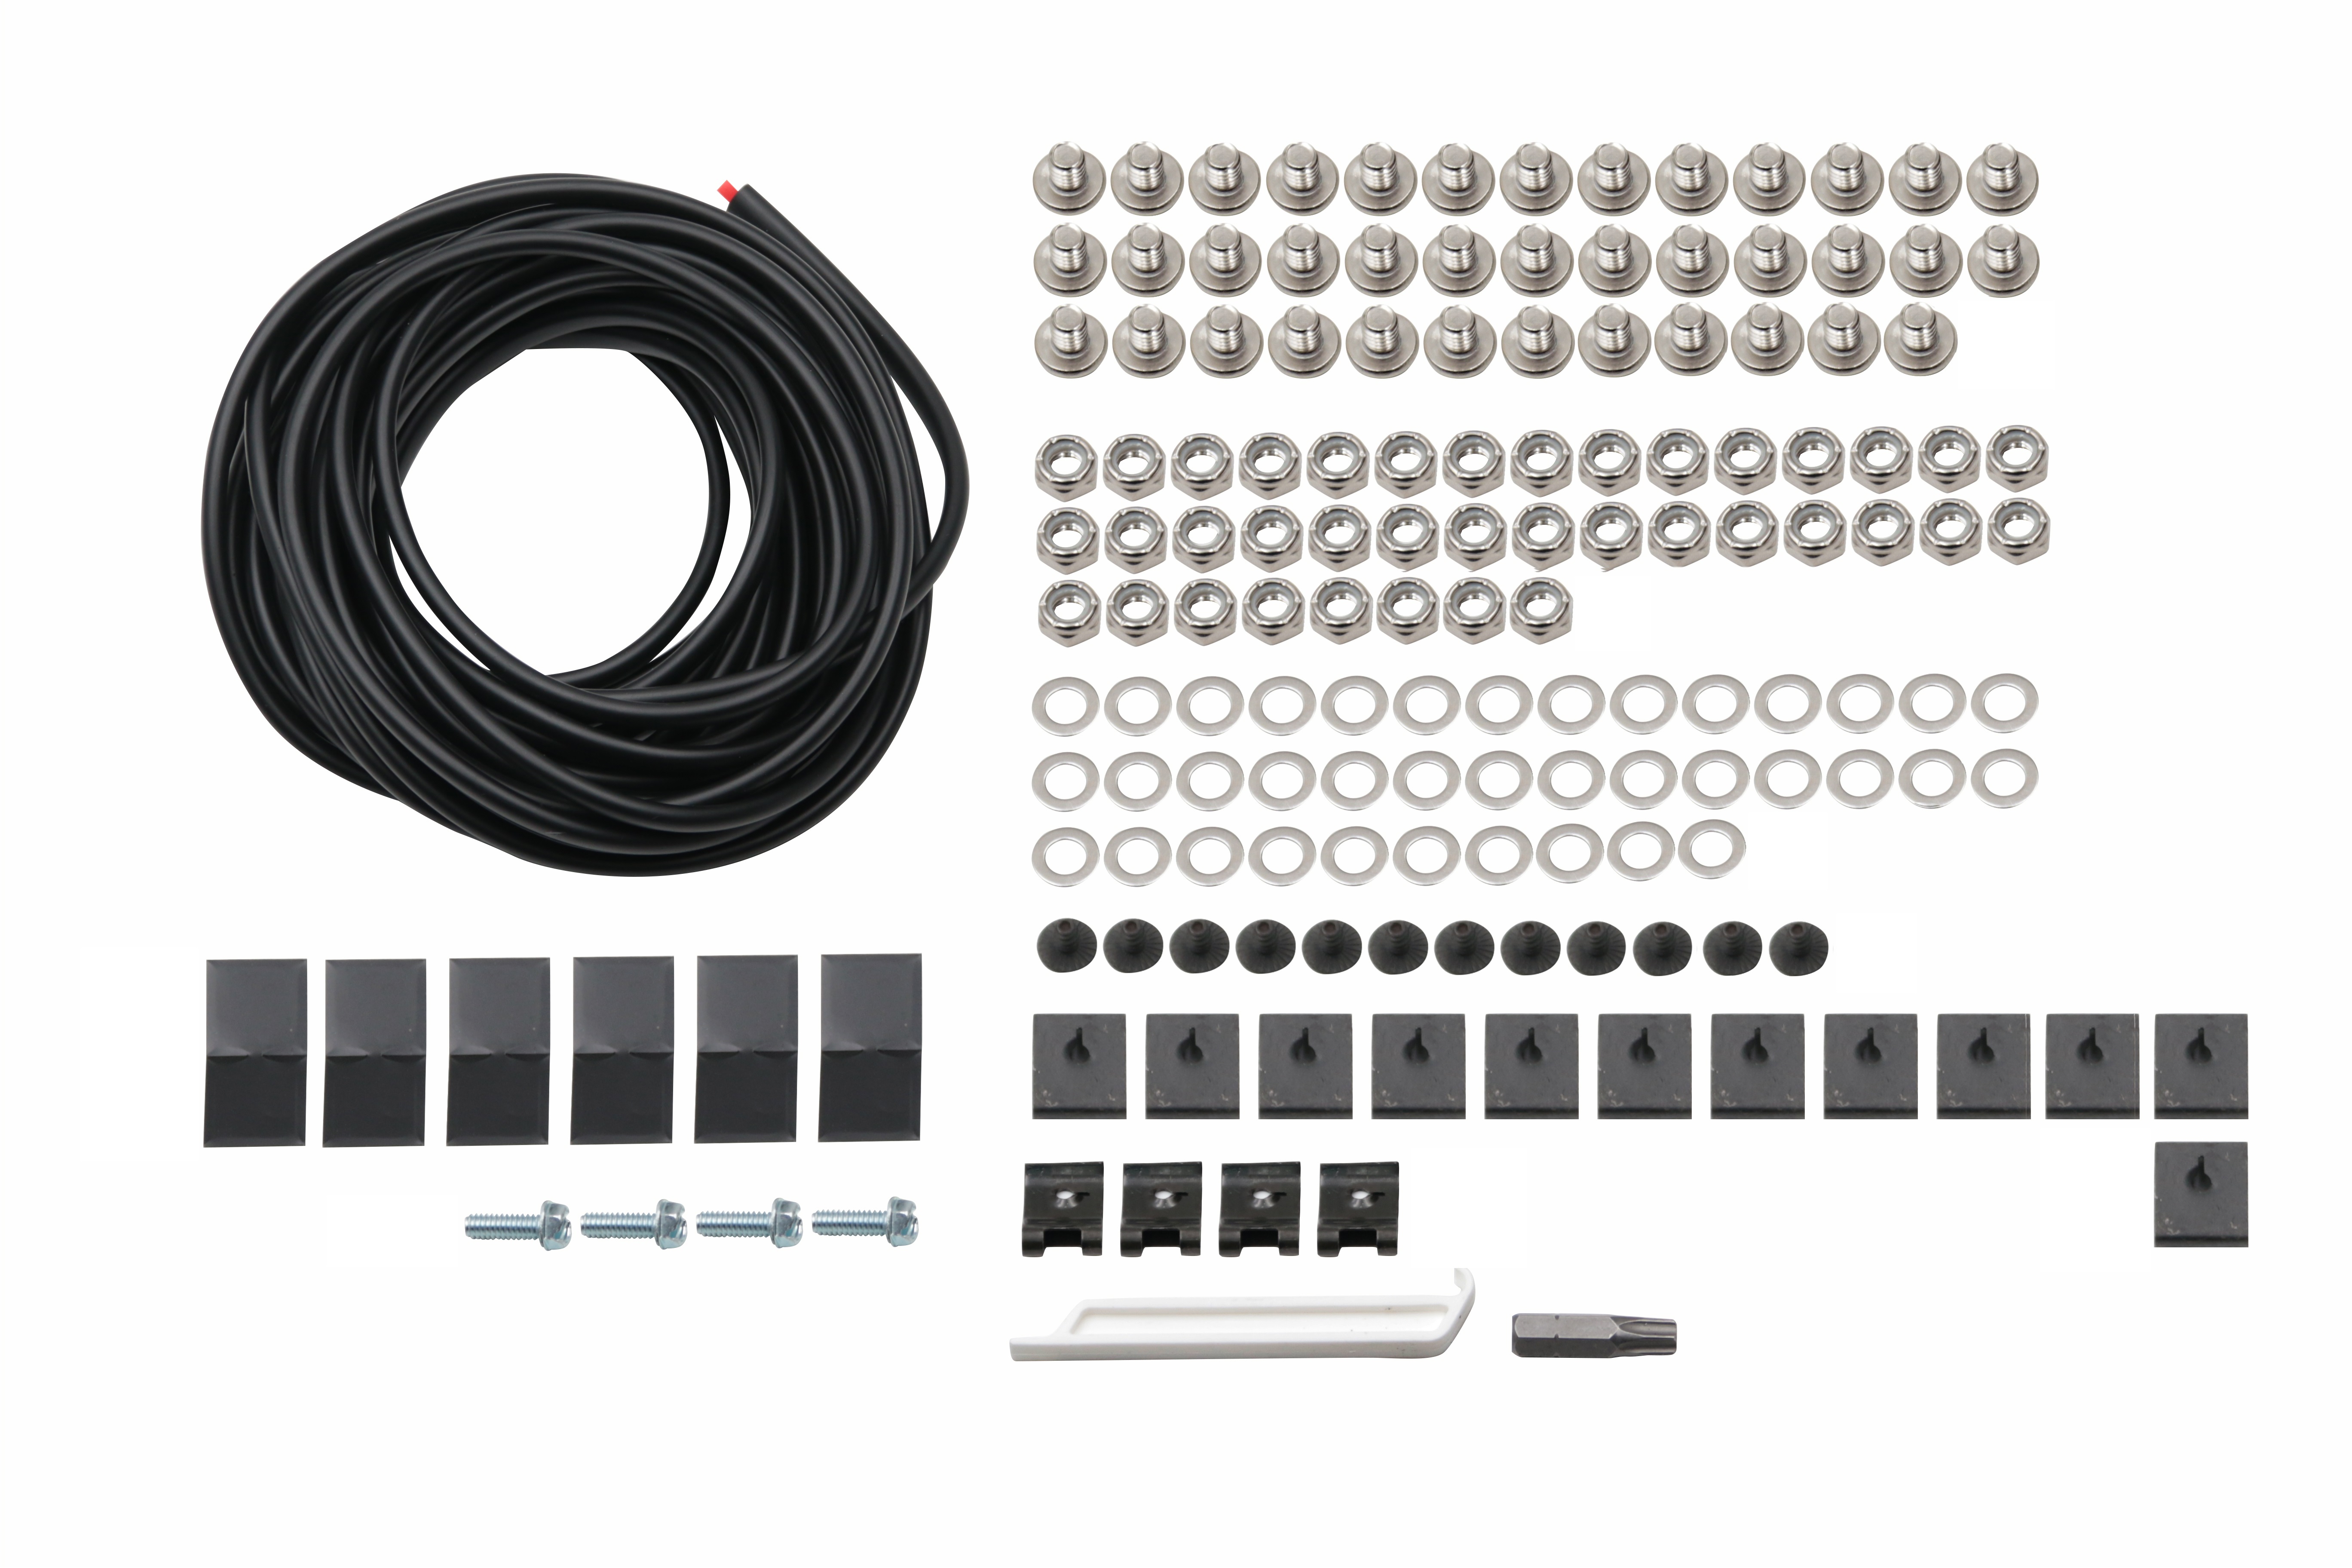 SP-FF4158 Hardware kit for TG-FF8G4158 and TG-FF8C4057